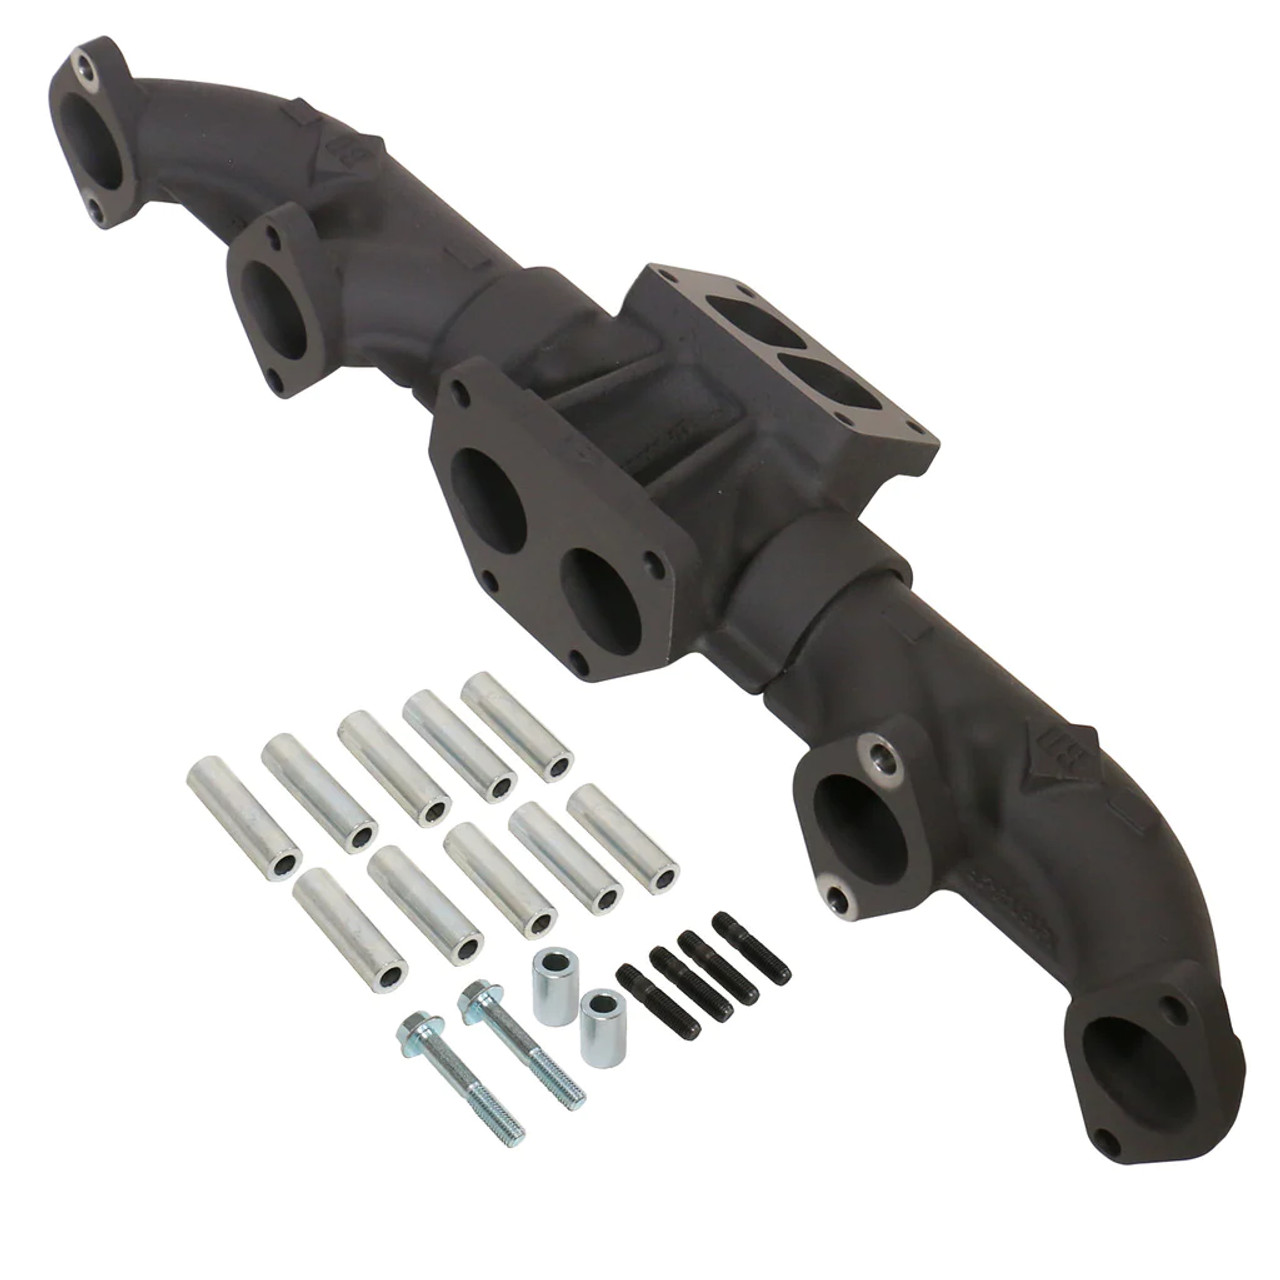  BD ISX EXHAUST MANIFOLD T6 UPGRADE 10MM STUDS CUMMINS PRE-2002 ( 1048008) Main View

Your store is not eligible for the new catalog experience